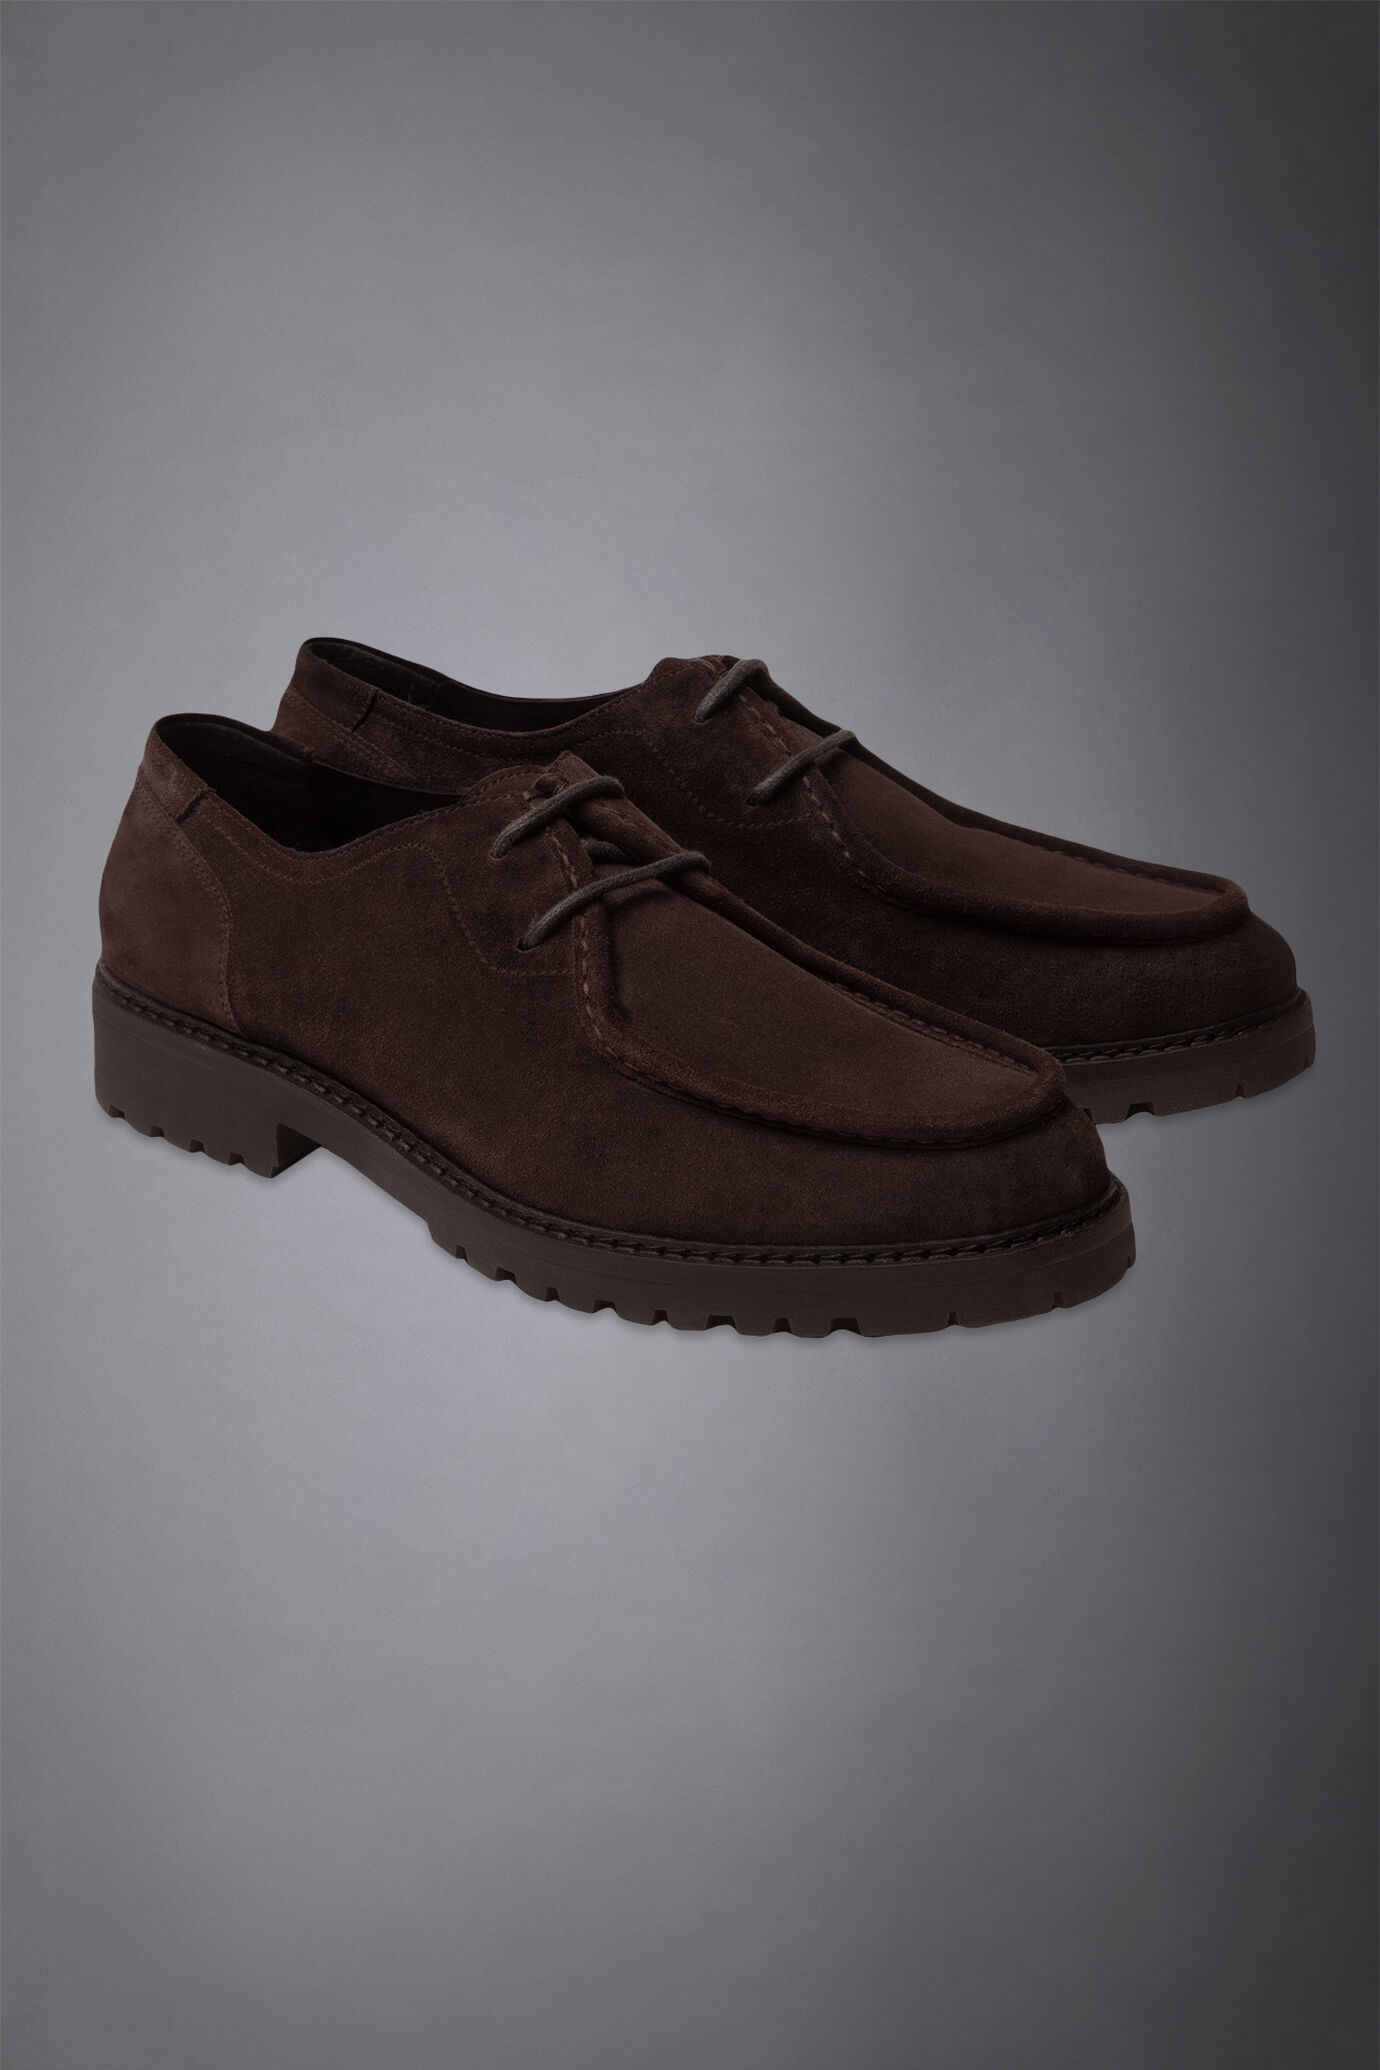 100% suede ranger shoe with rubber lug sole